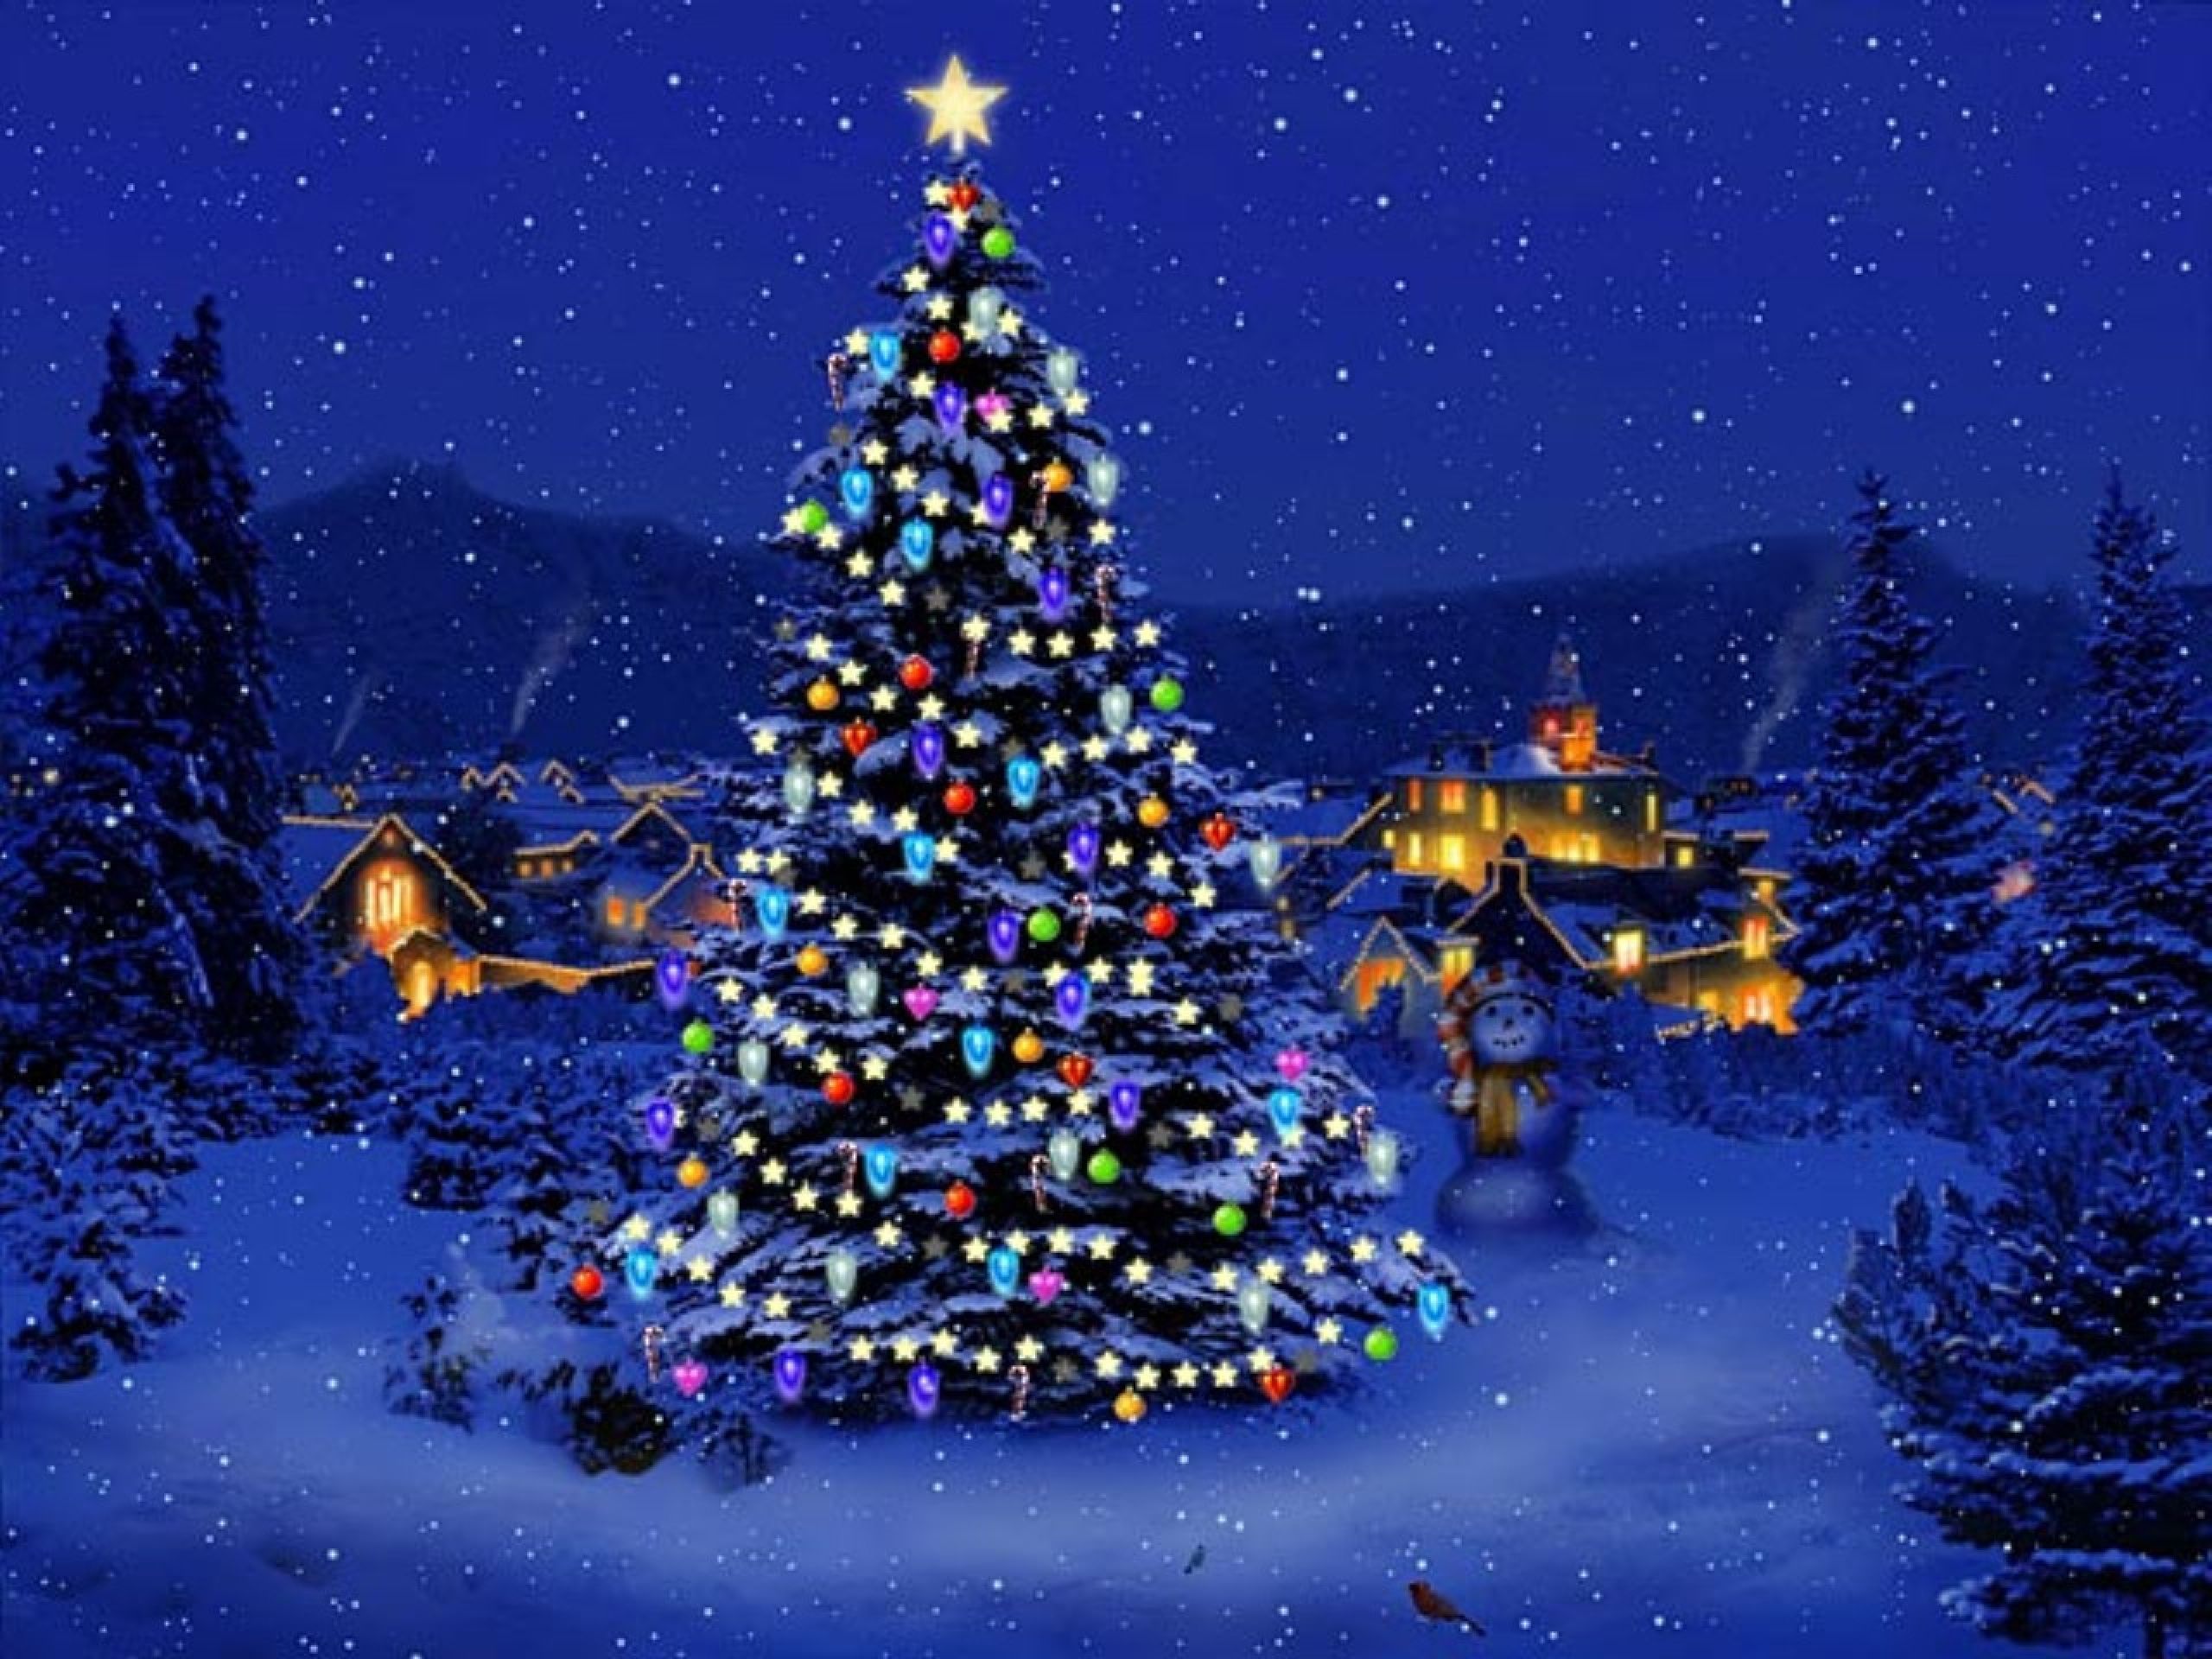 free christmas themes for windows 7. Download Wallpaper, Download 2560x1920 CHRISTMA. Christmas tree image, Christmas tree wallpaper, Beautiful christmas trees